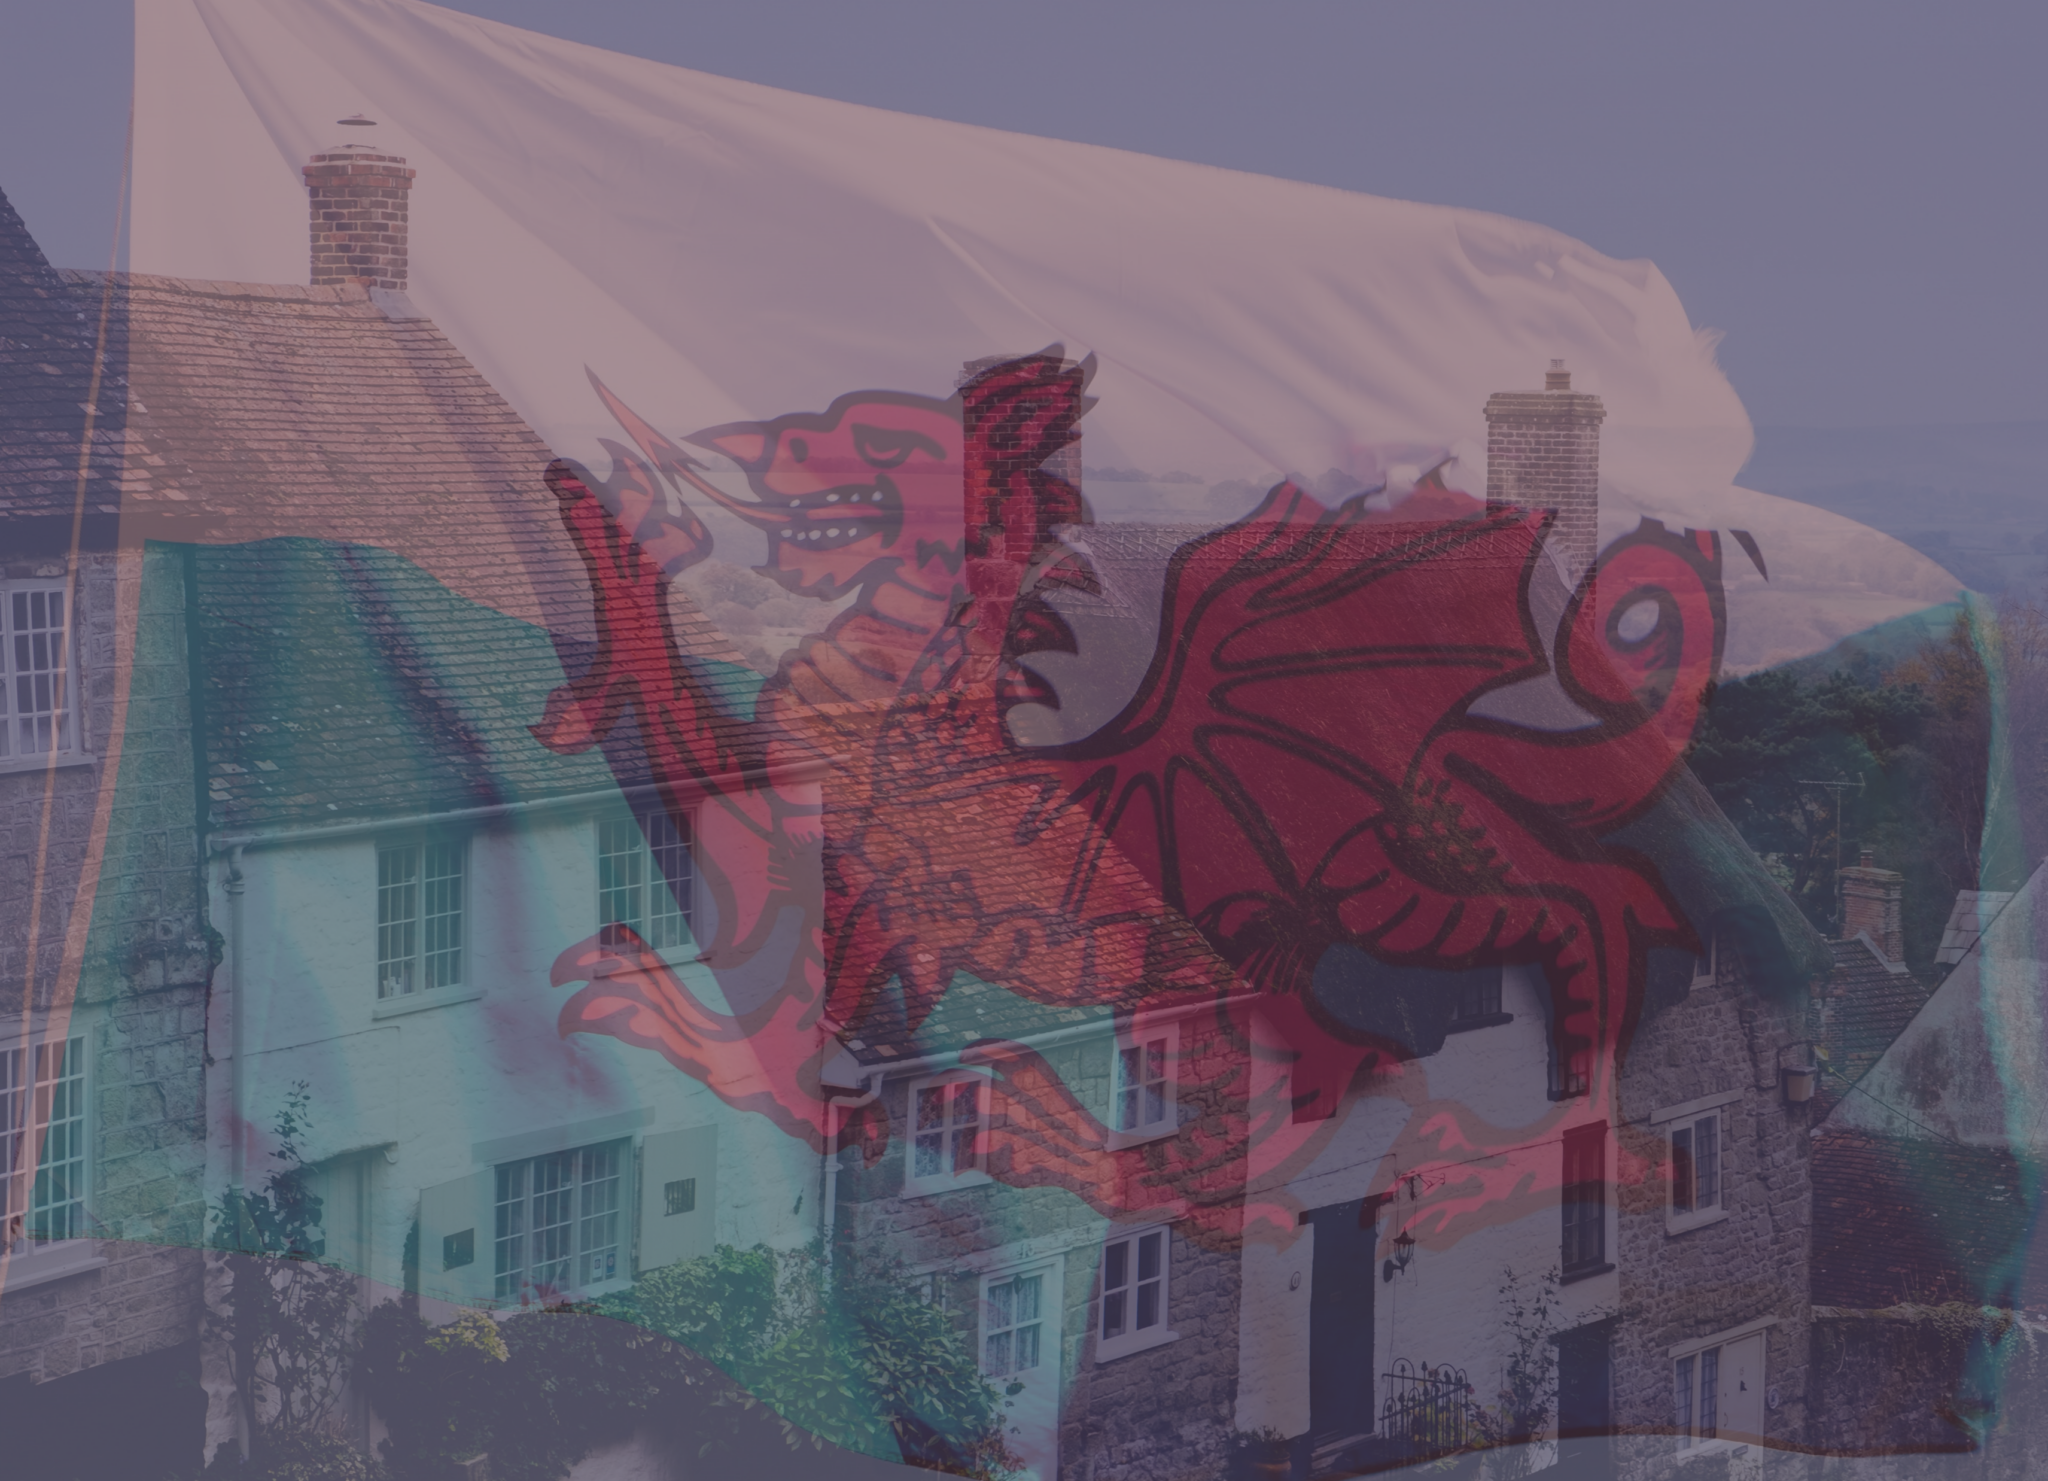 HOUSING LAW IN WALES IS CHANGING